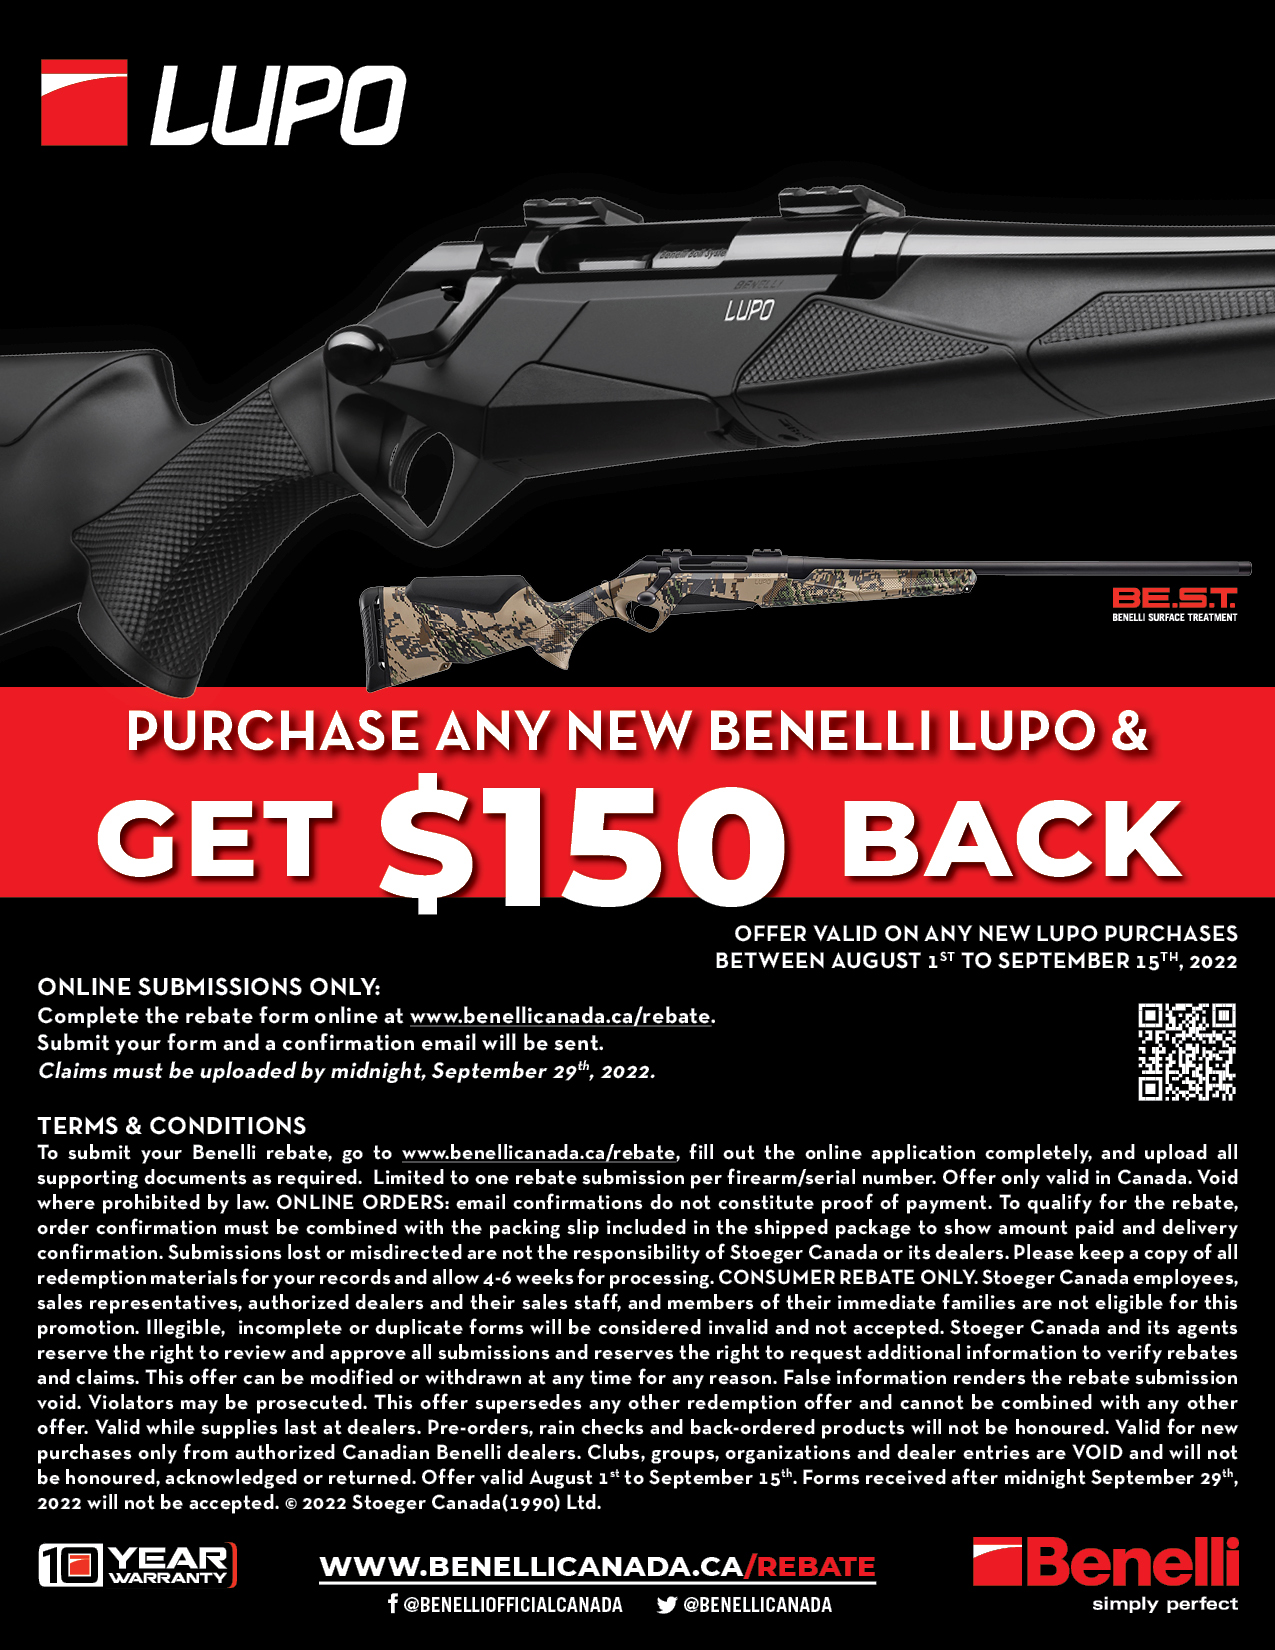 Benelli LUPO Rebate 2022 Terms Conditions